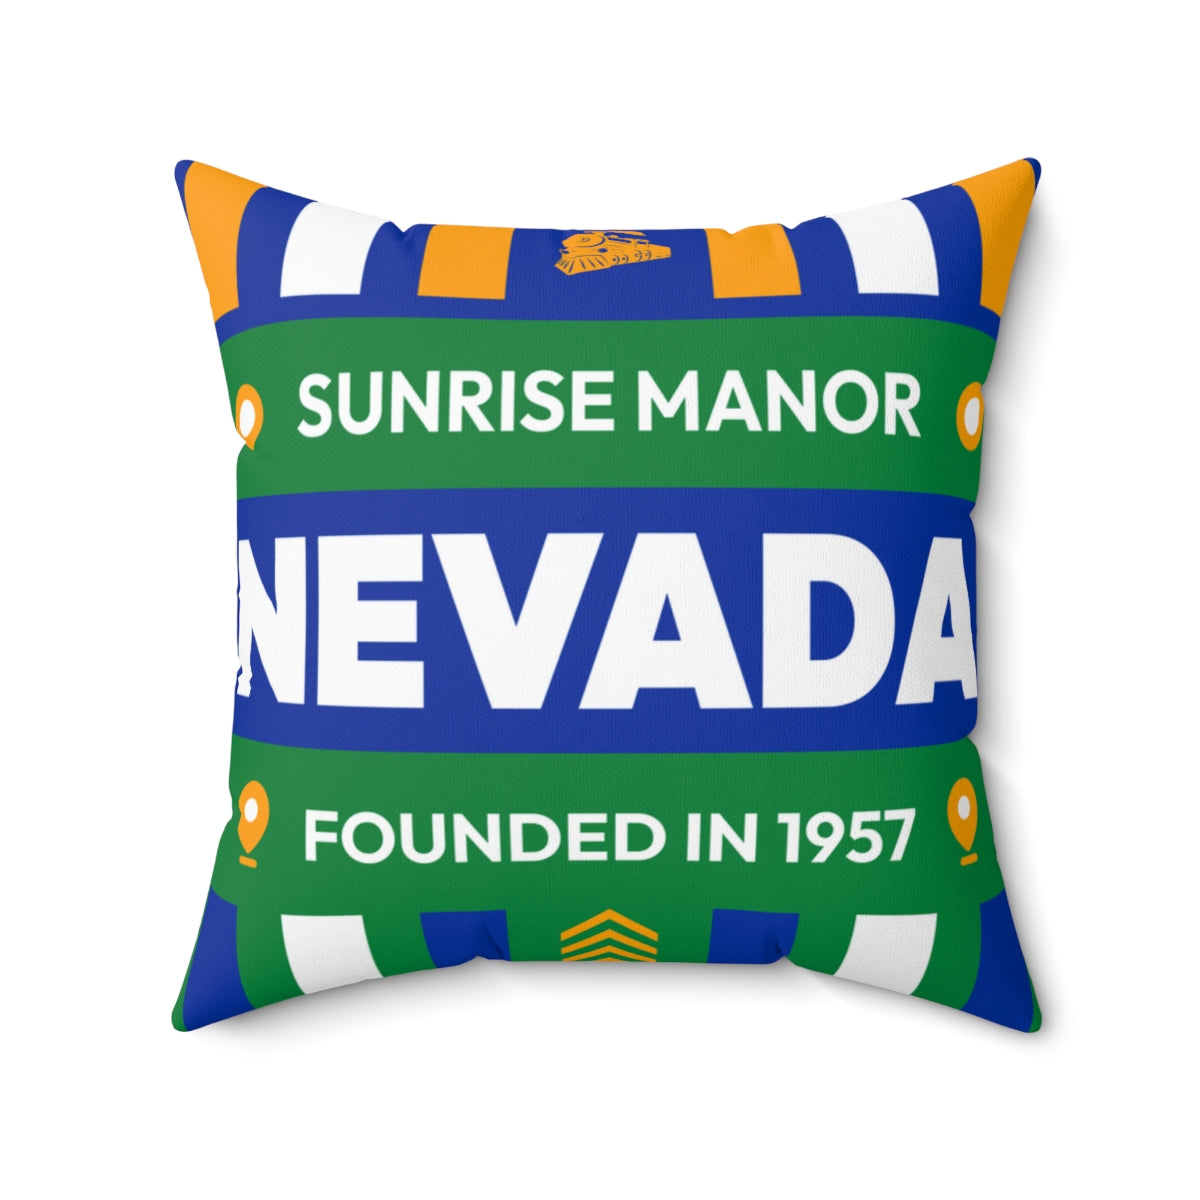 20"x20" pillow design for Sunrise Manor, Nevada Top view.